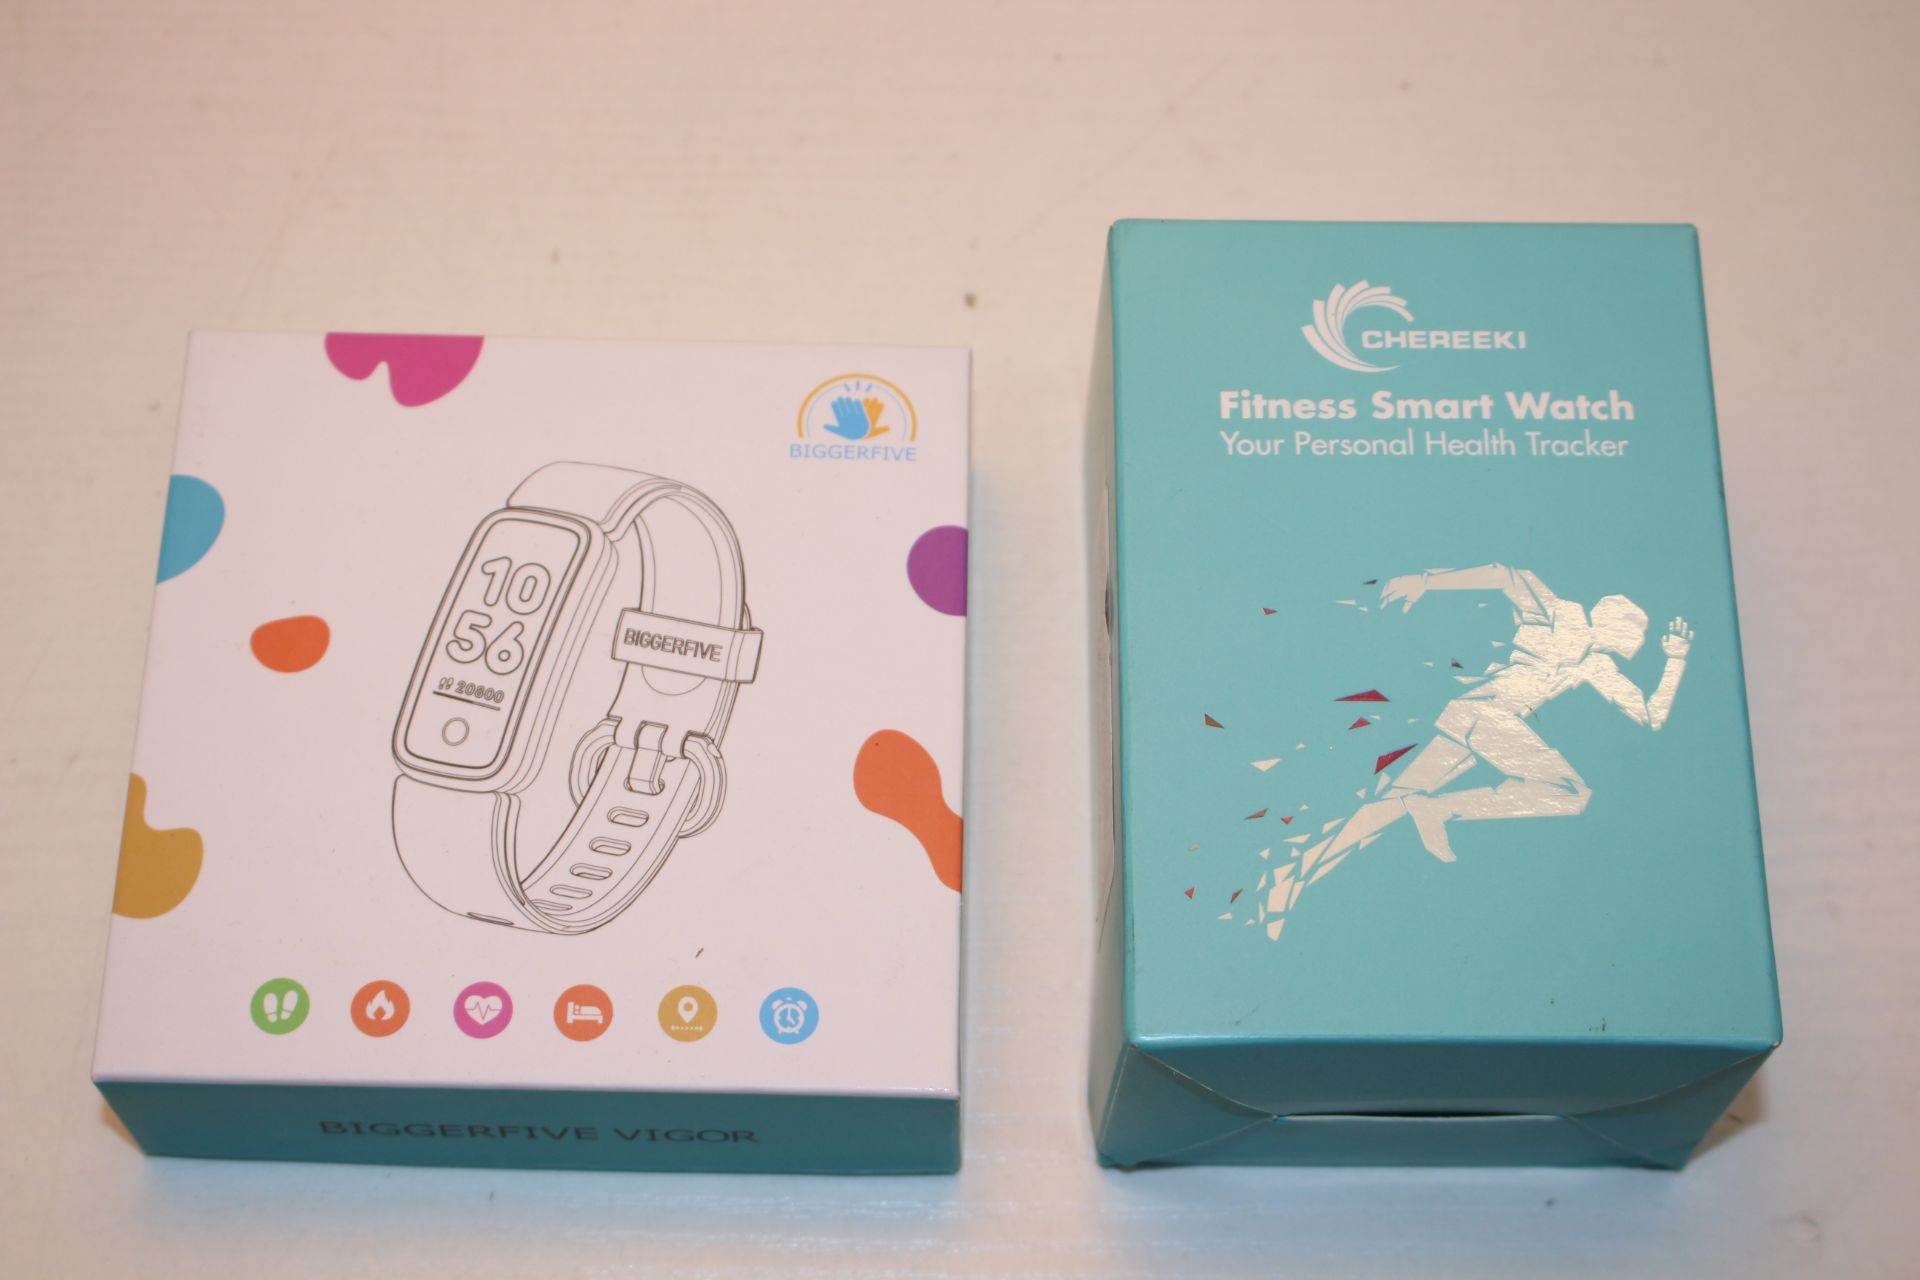 2X BOXED ASSORTED SMART WATCHES/FITNESS TRACKERS (IMAGE DEPICTS STOCK)Condition ReportAppraisal